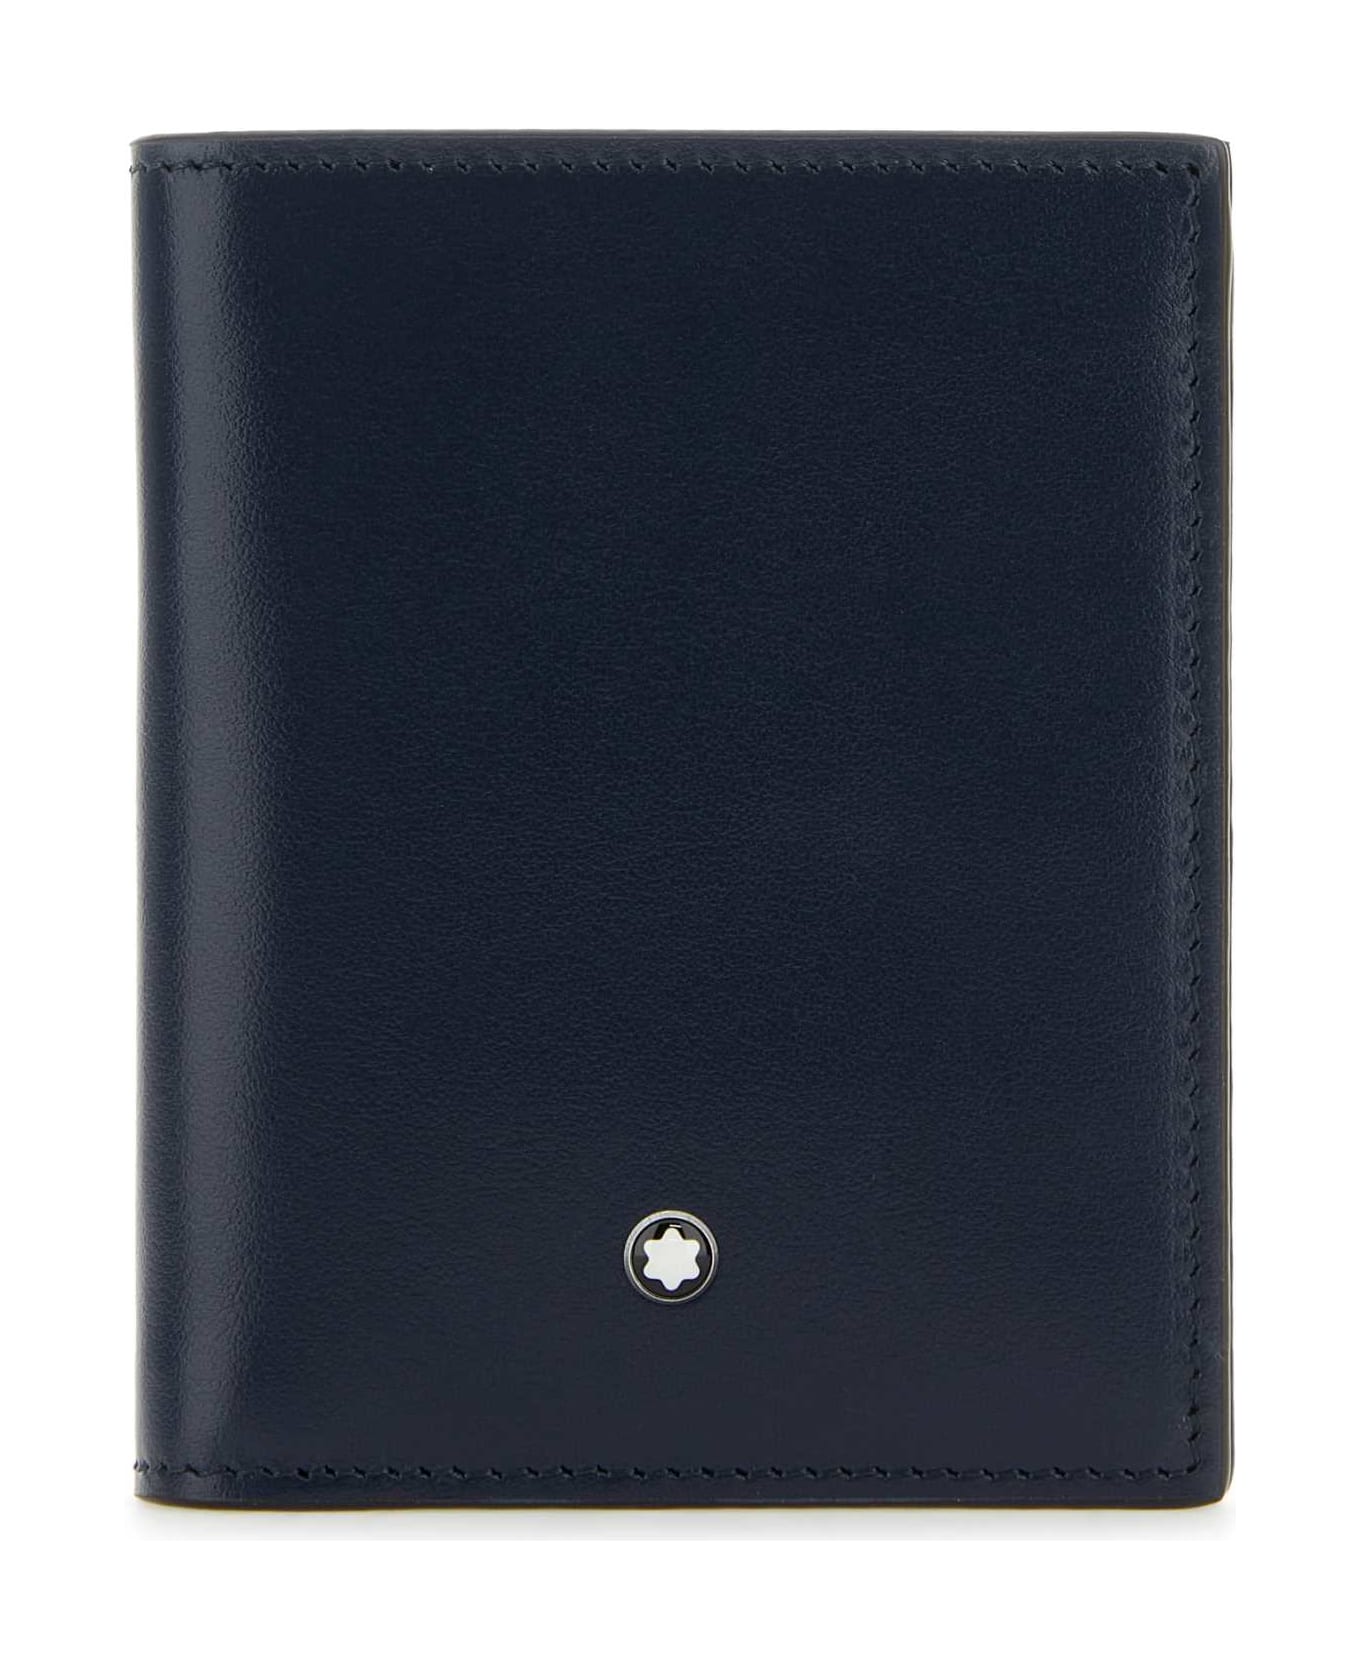 Montblanc Blue Leather Wallet - INKBLUE